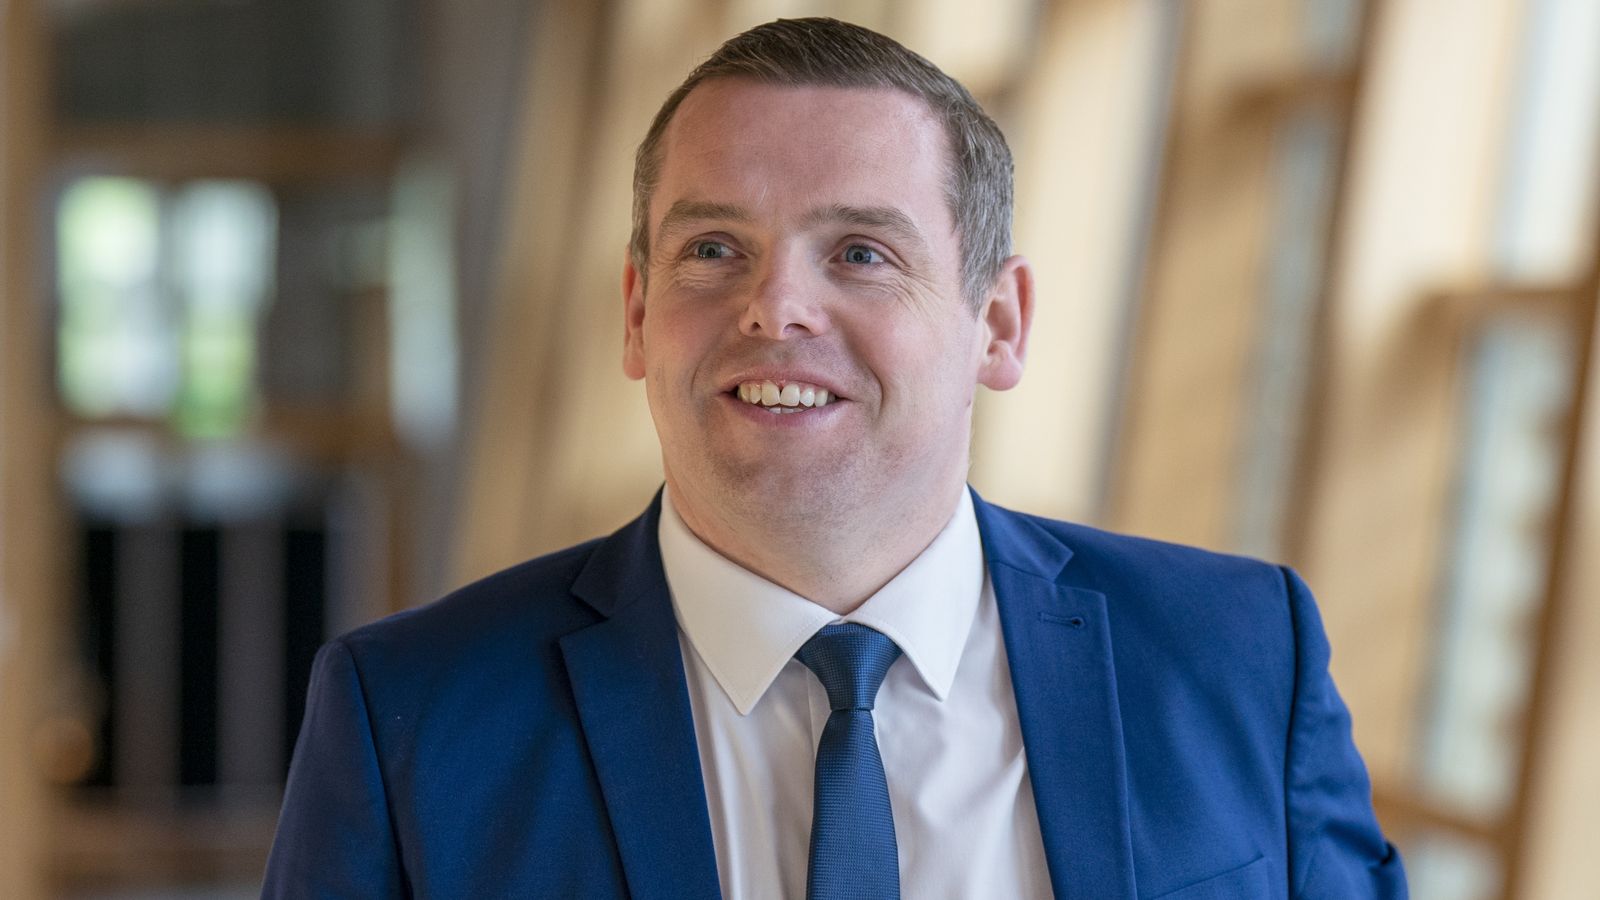 Scottish Conservative leader Douglas Ross to stand in seat after outgoing MP David Duguid blocked by Tories